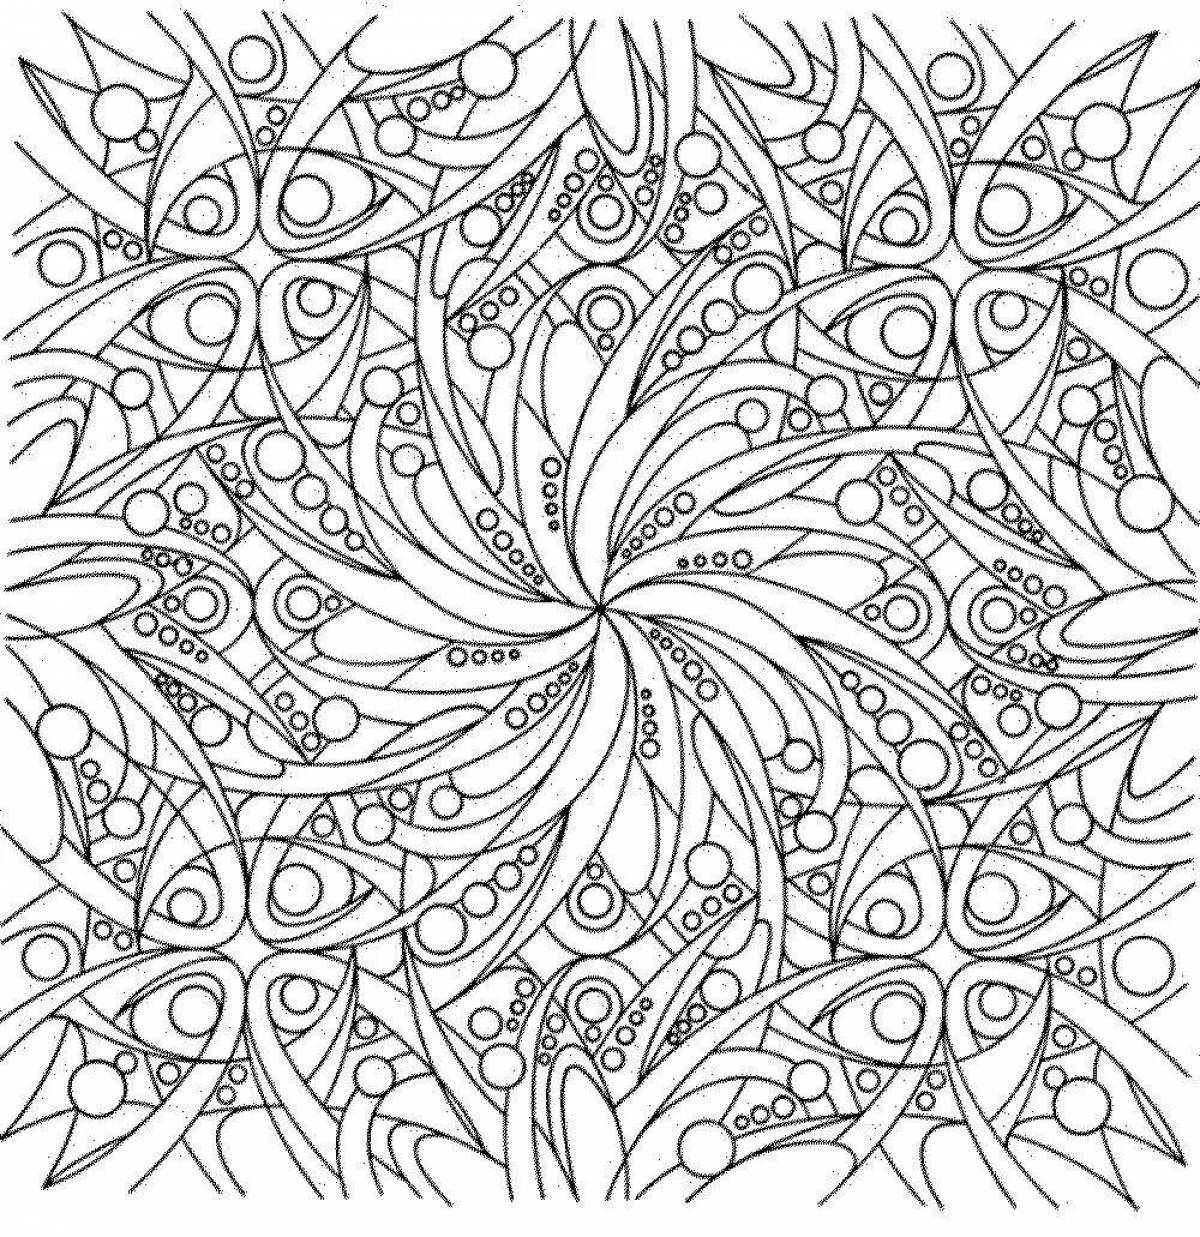 Coloring page with intricate patterns - imagination